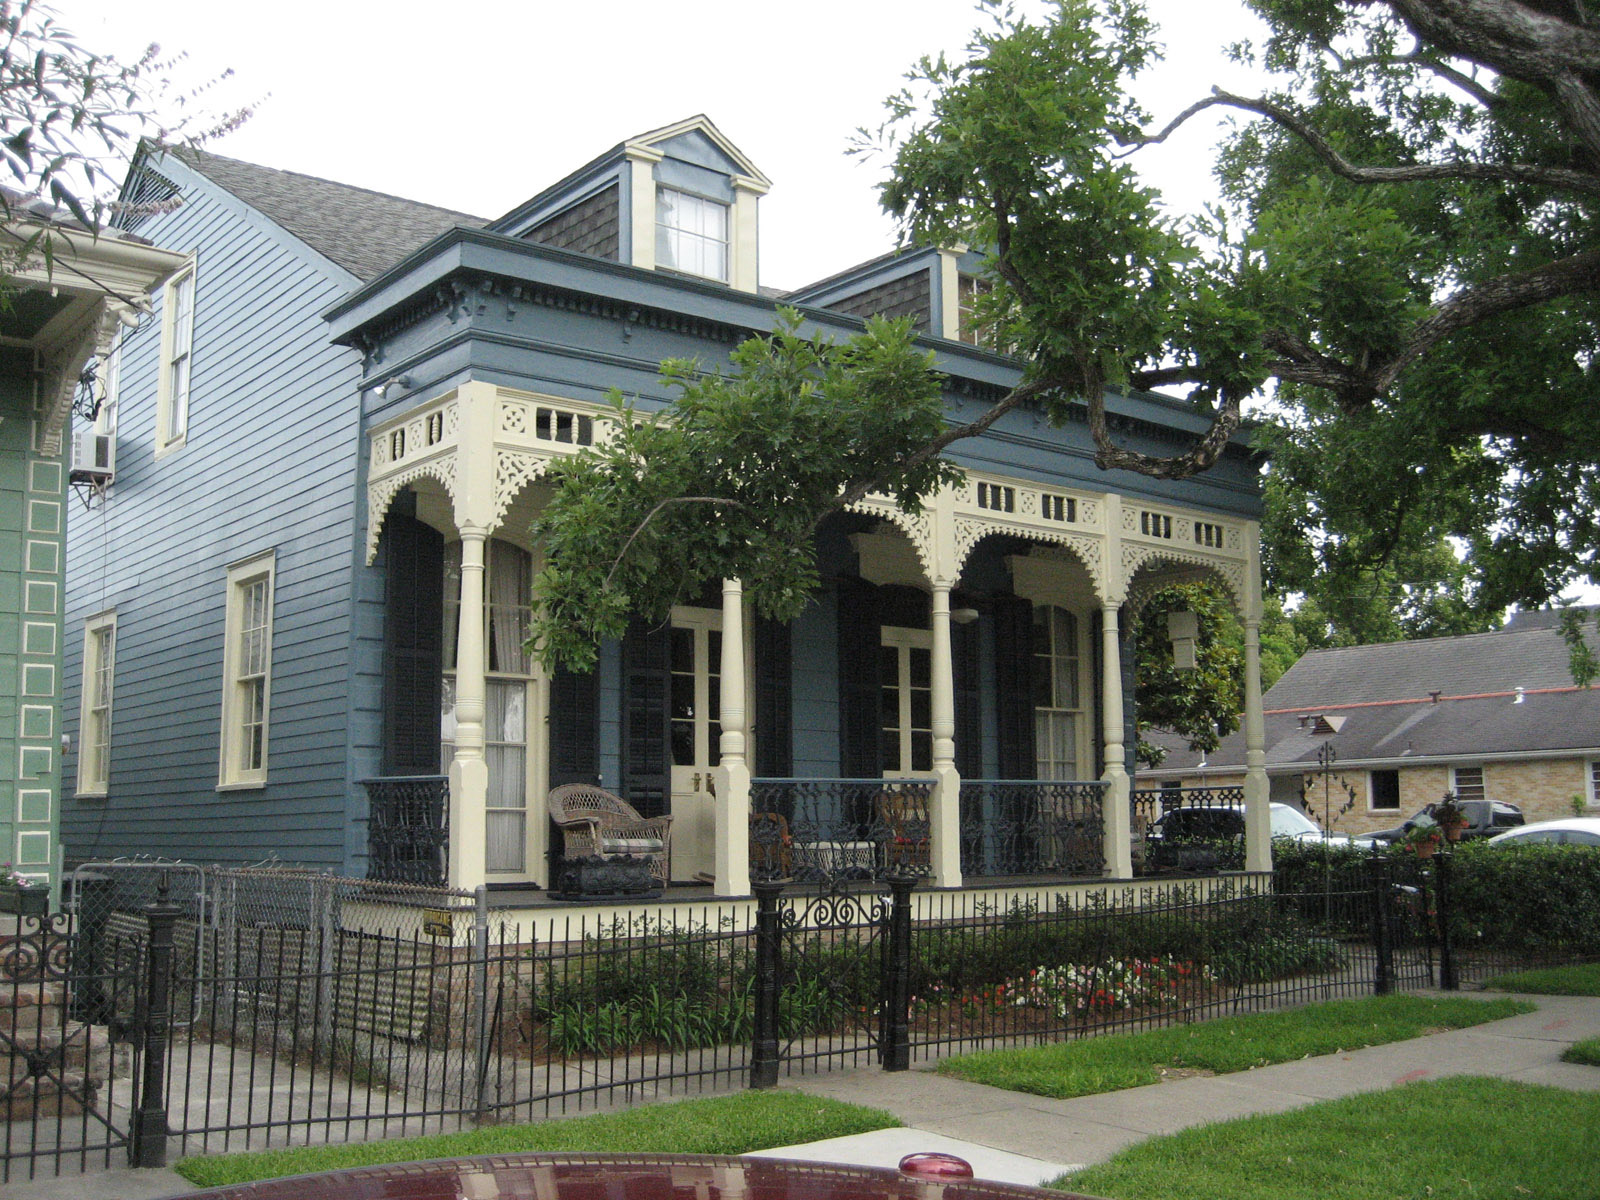 Residential House In New Orleans City Wallpaper